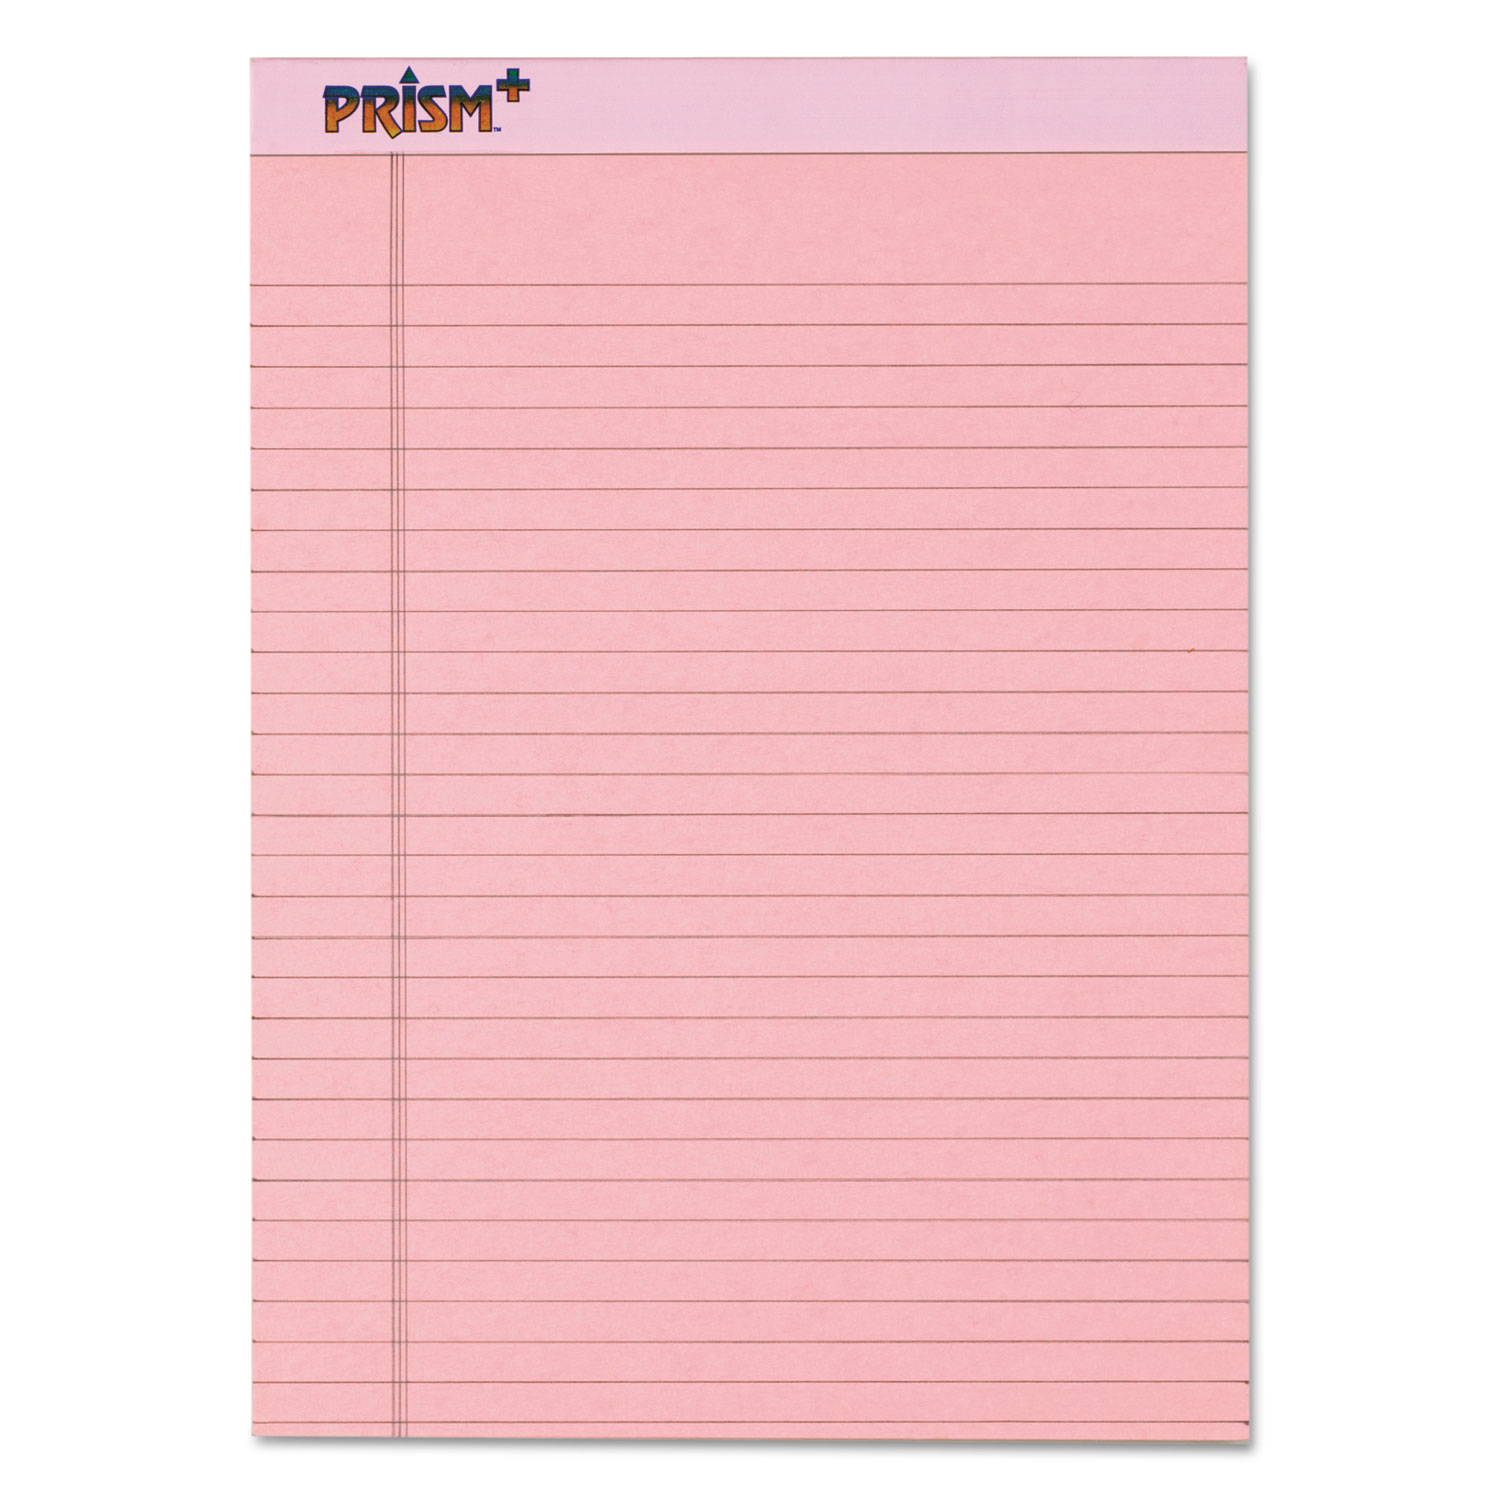  TOPS 63150 Prism + Writing Pads, Wide/Legal Rule, 8.5 x 11.75, Pastel Pink, 50 Sheets, 12/Pack (TOP63150) 